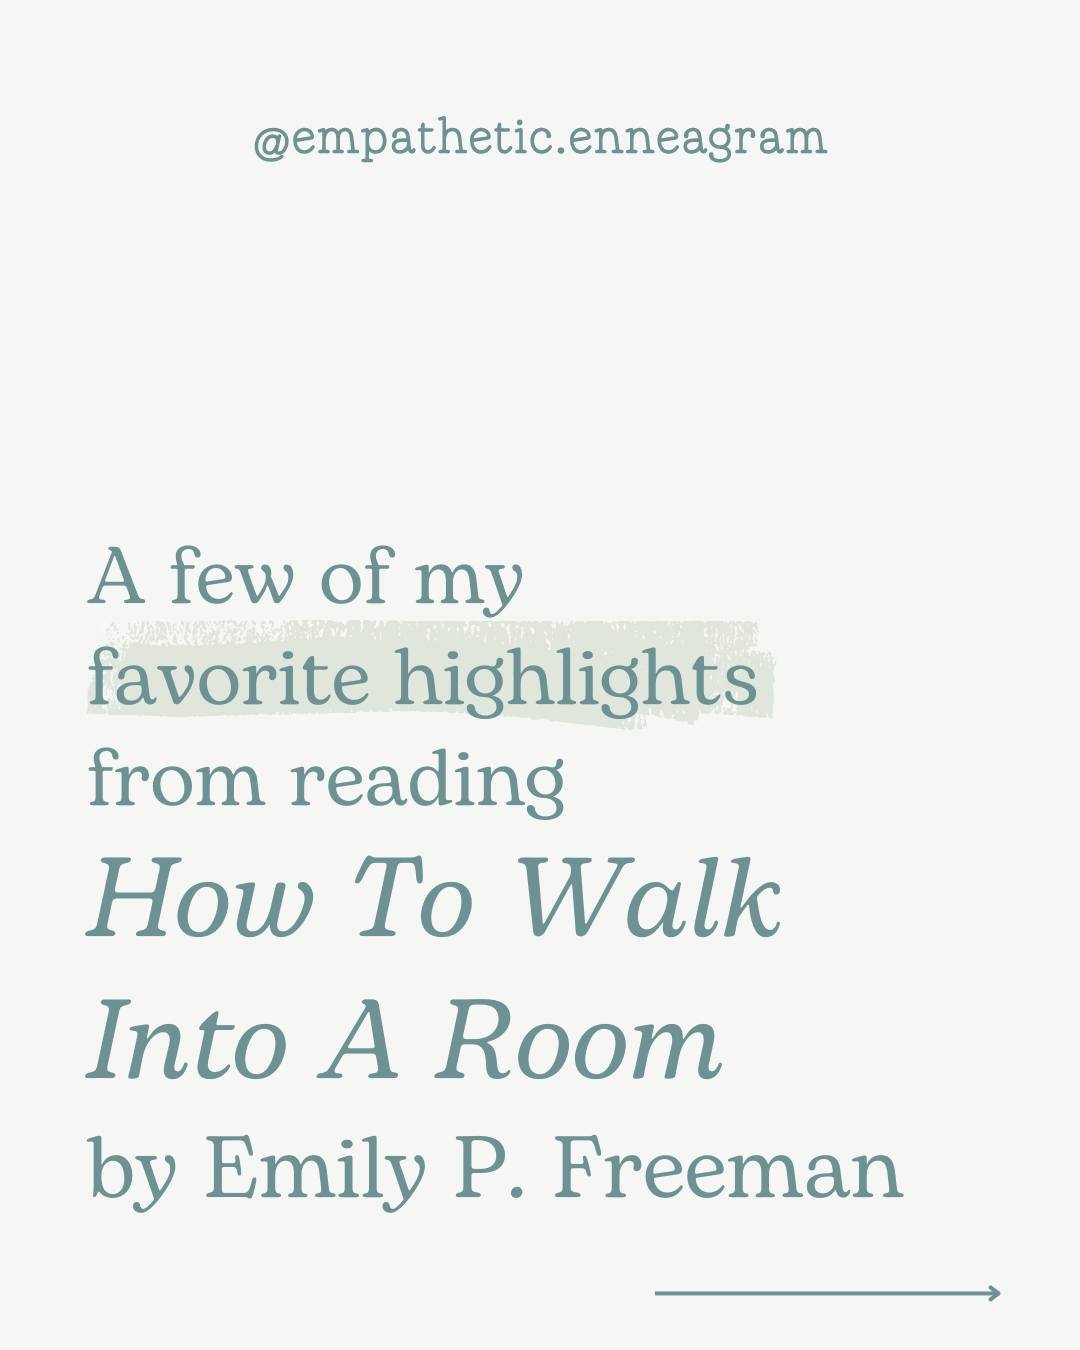 📚 Where are my book readers?!

I'm starting a new type of post where I share my favorite highlights from a book I've finished recently. 

I'm starting with Emily P. Freeman's (@emilypfreeman) newest book &quot;How To Walk Into A Room.&quot; I bought